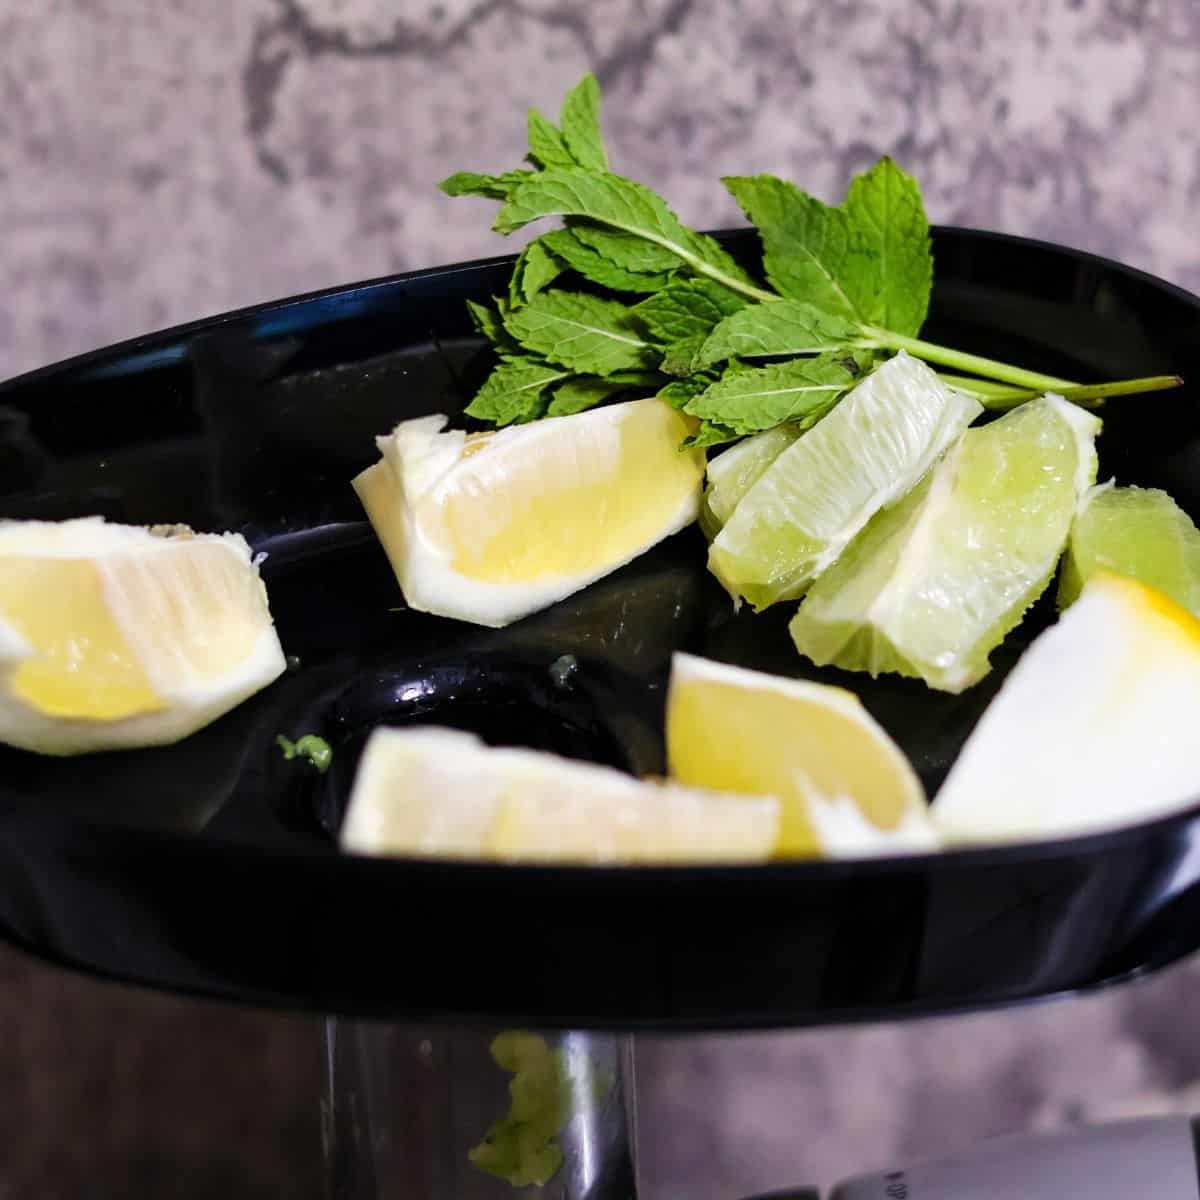 Lemon and lime wedges with fresh mint leaves in a juicer tray, ready for juicing.